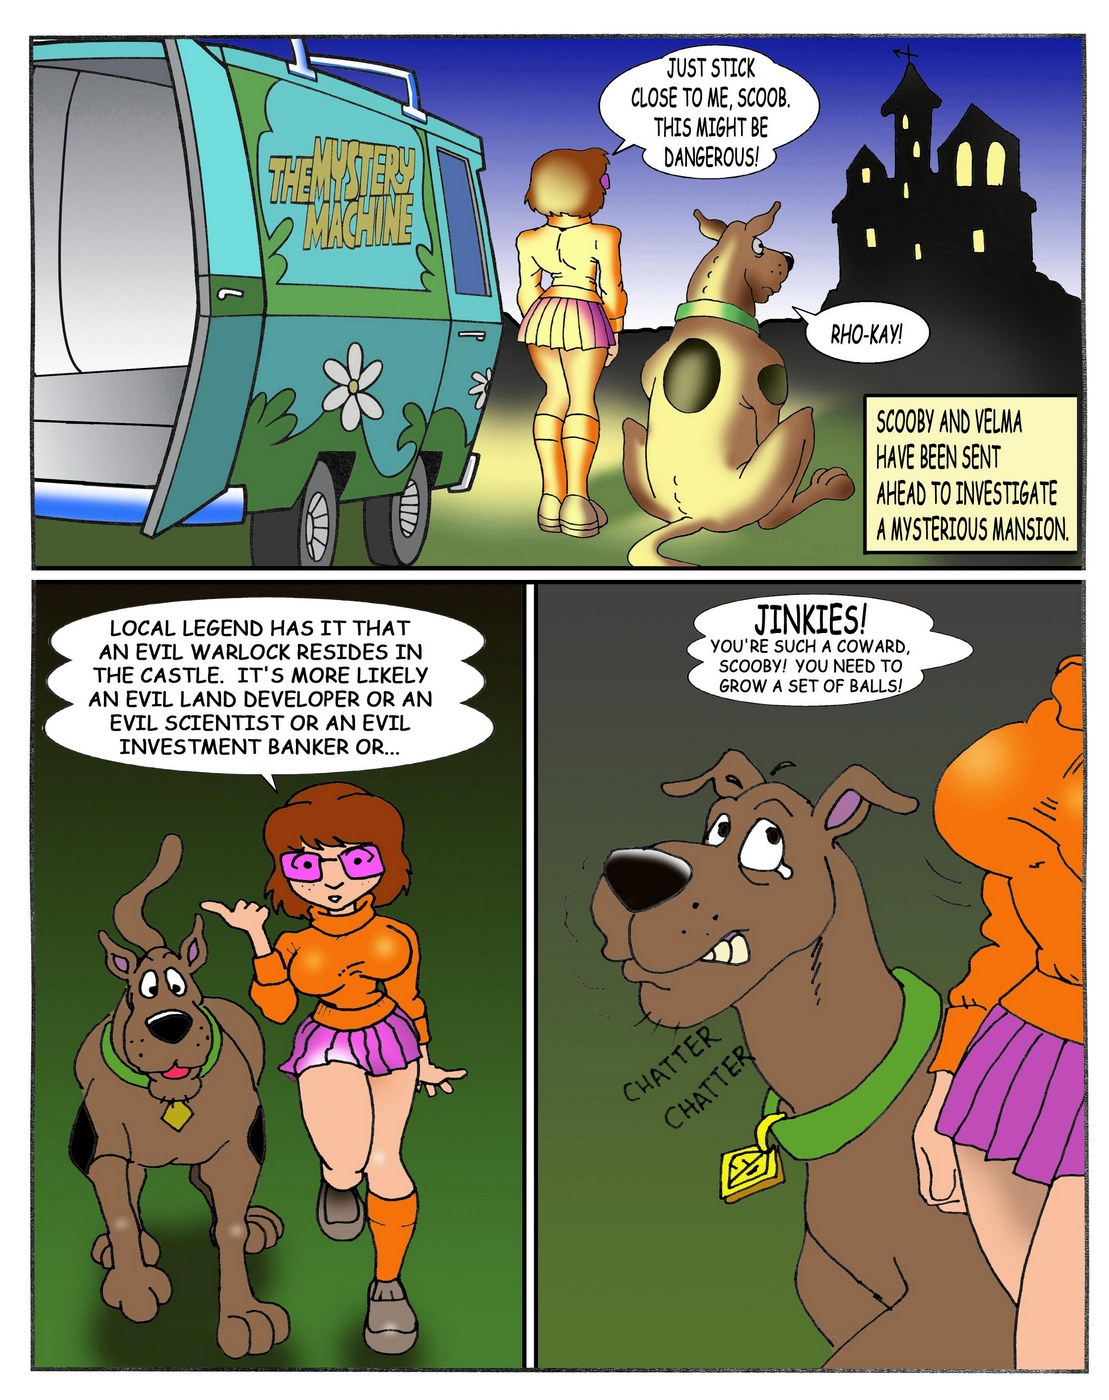 Scooby Doo Dog Sex - Mystery of the Sexual Weapon (Scooby-Doo) - Porn Cartoon Comics